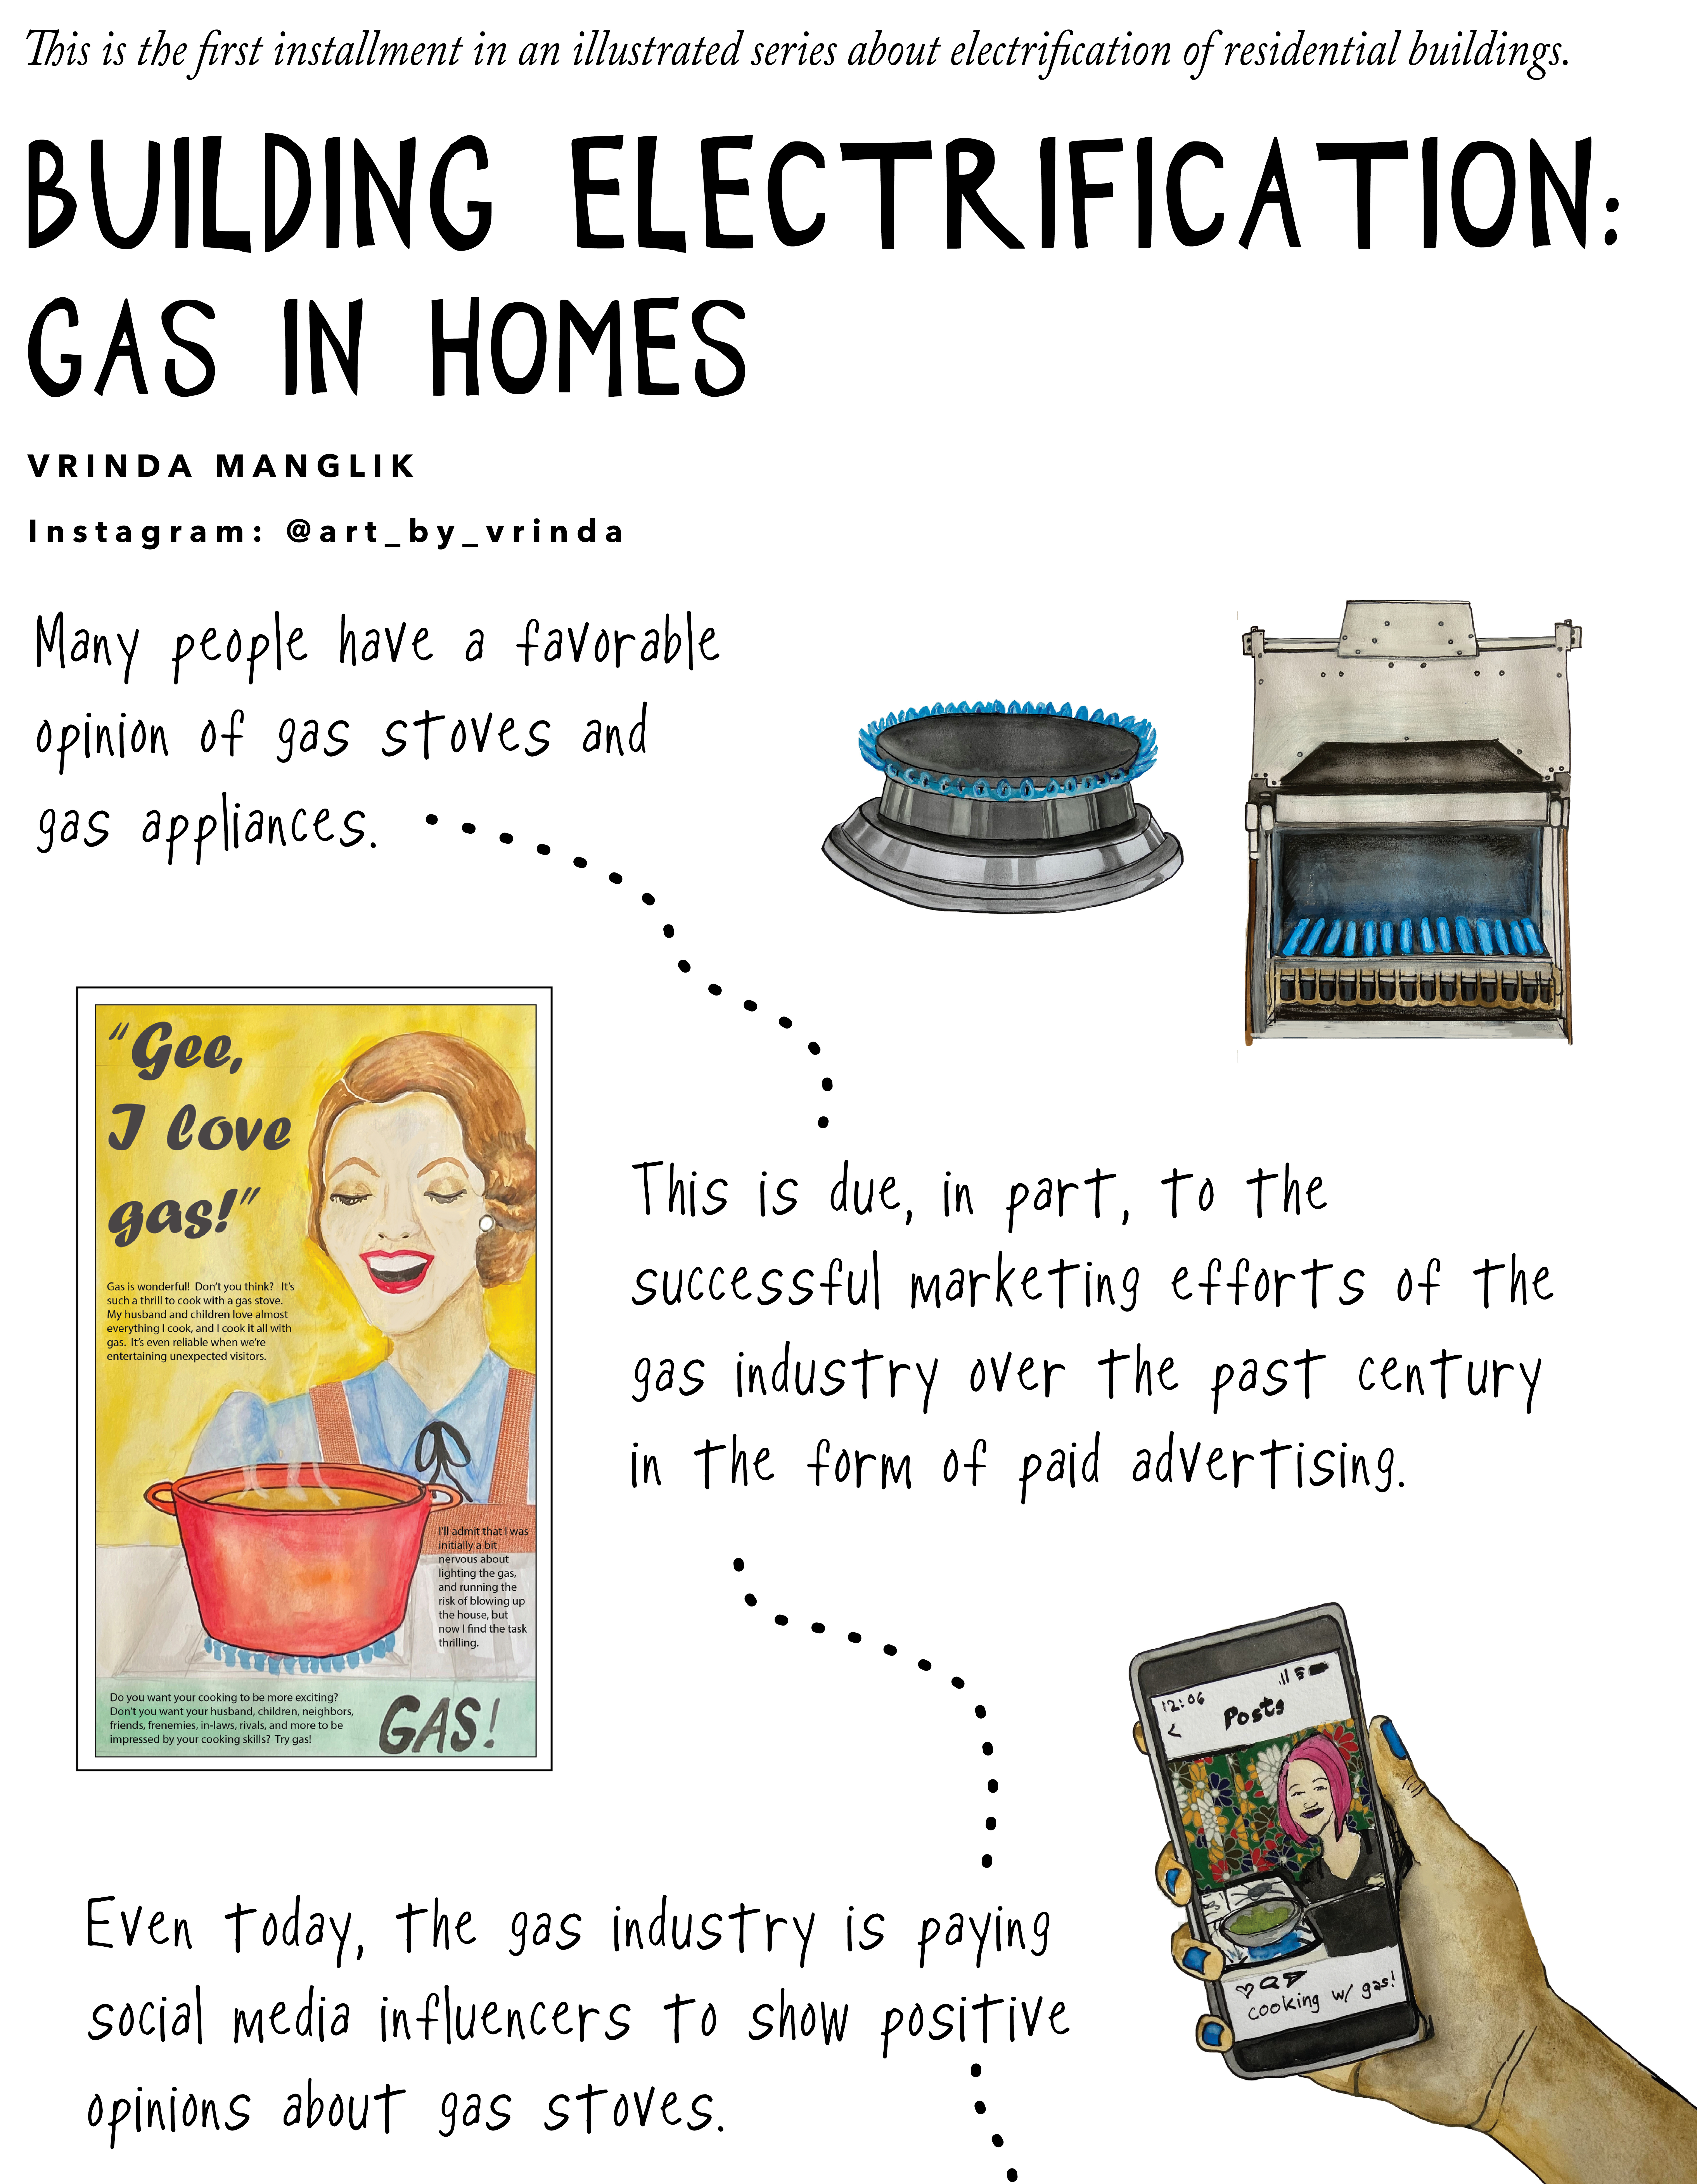 Illustrated series showing the negative impacts of gas appliances